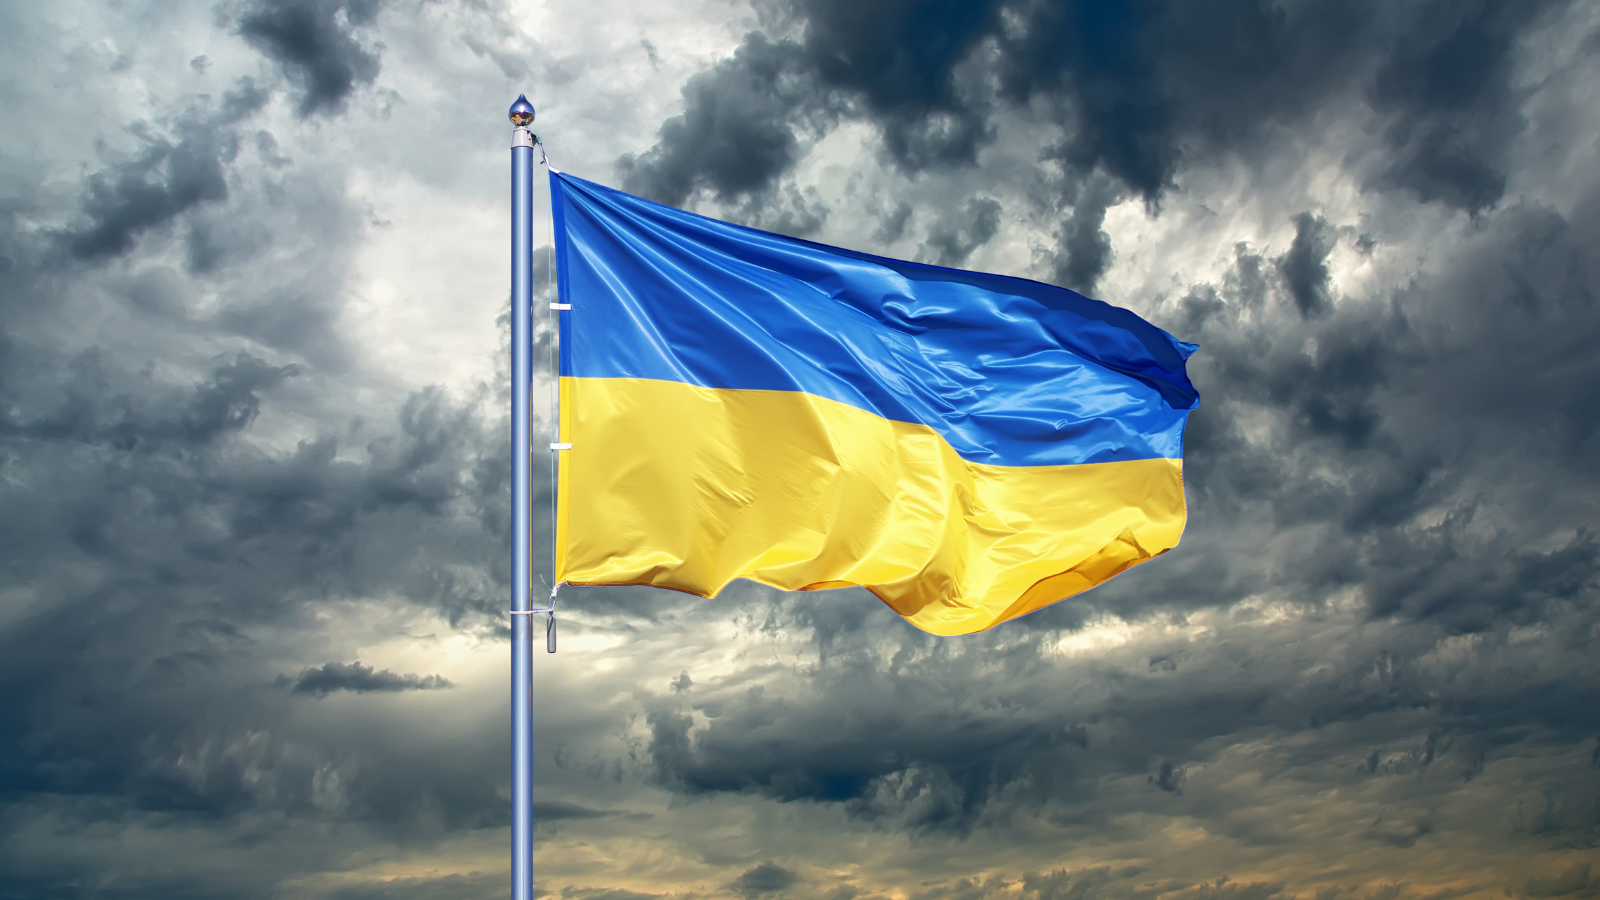 Appeal for peace in Ukraine